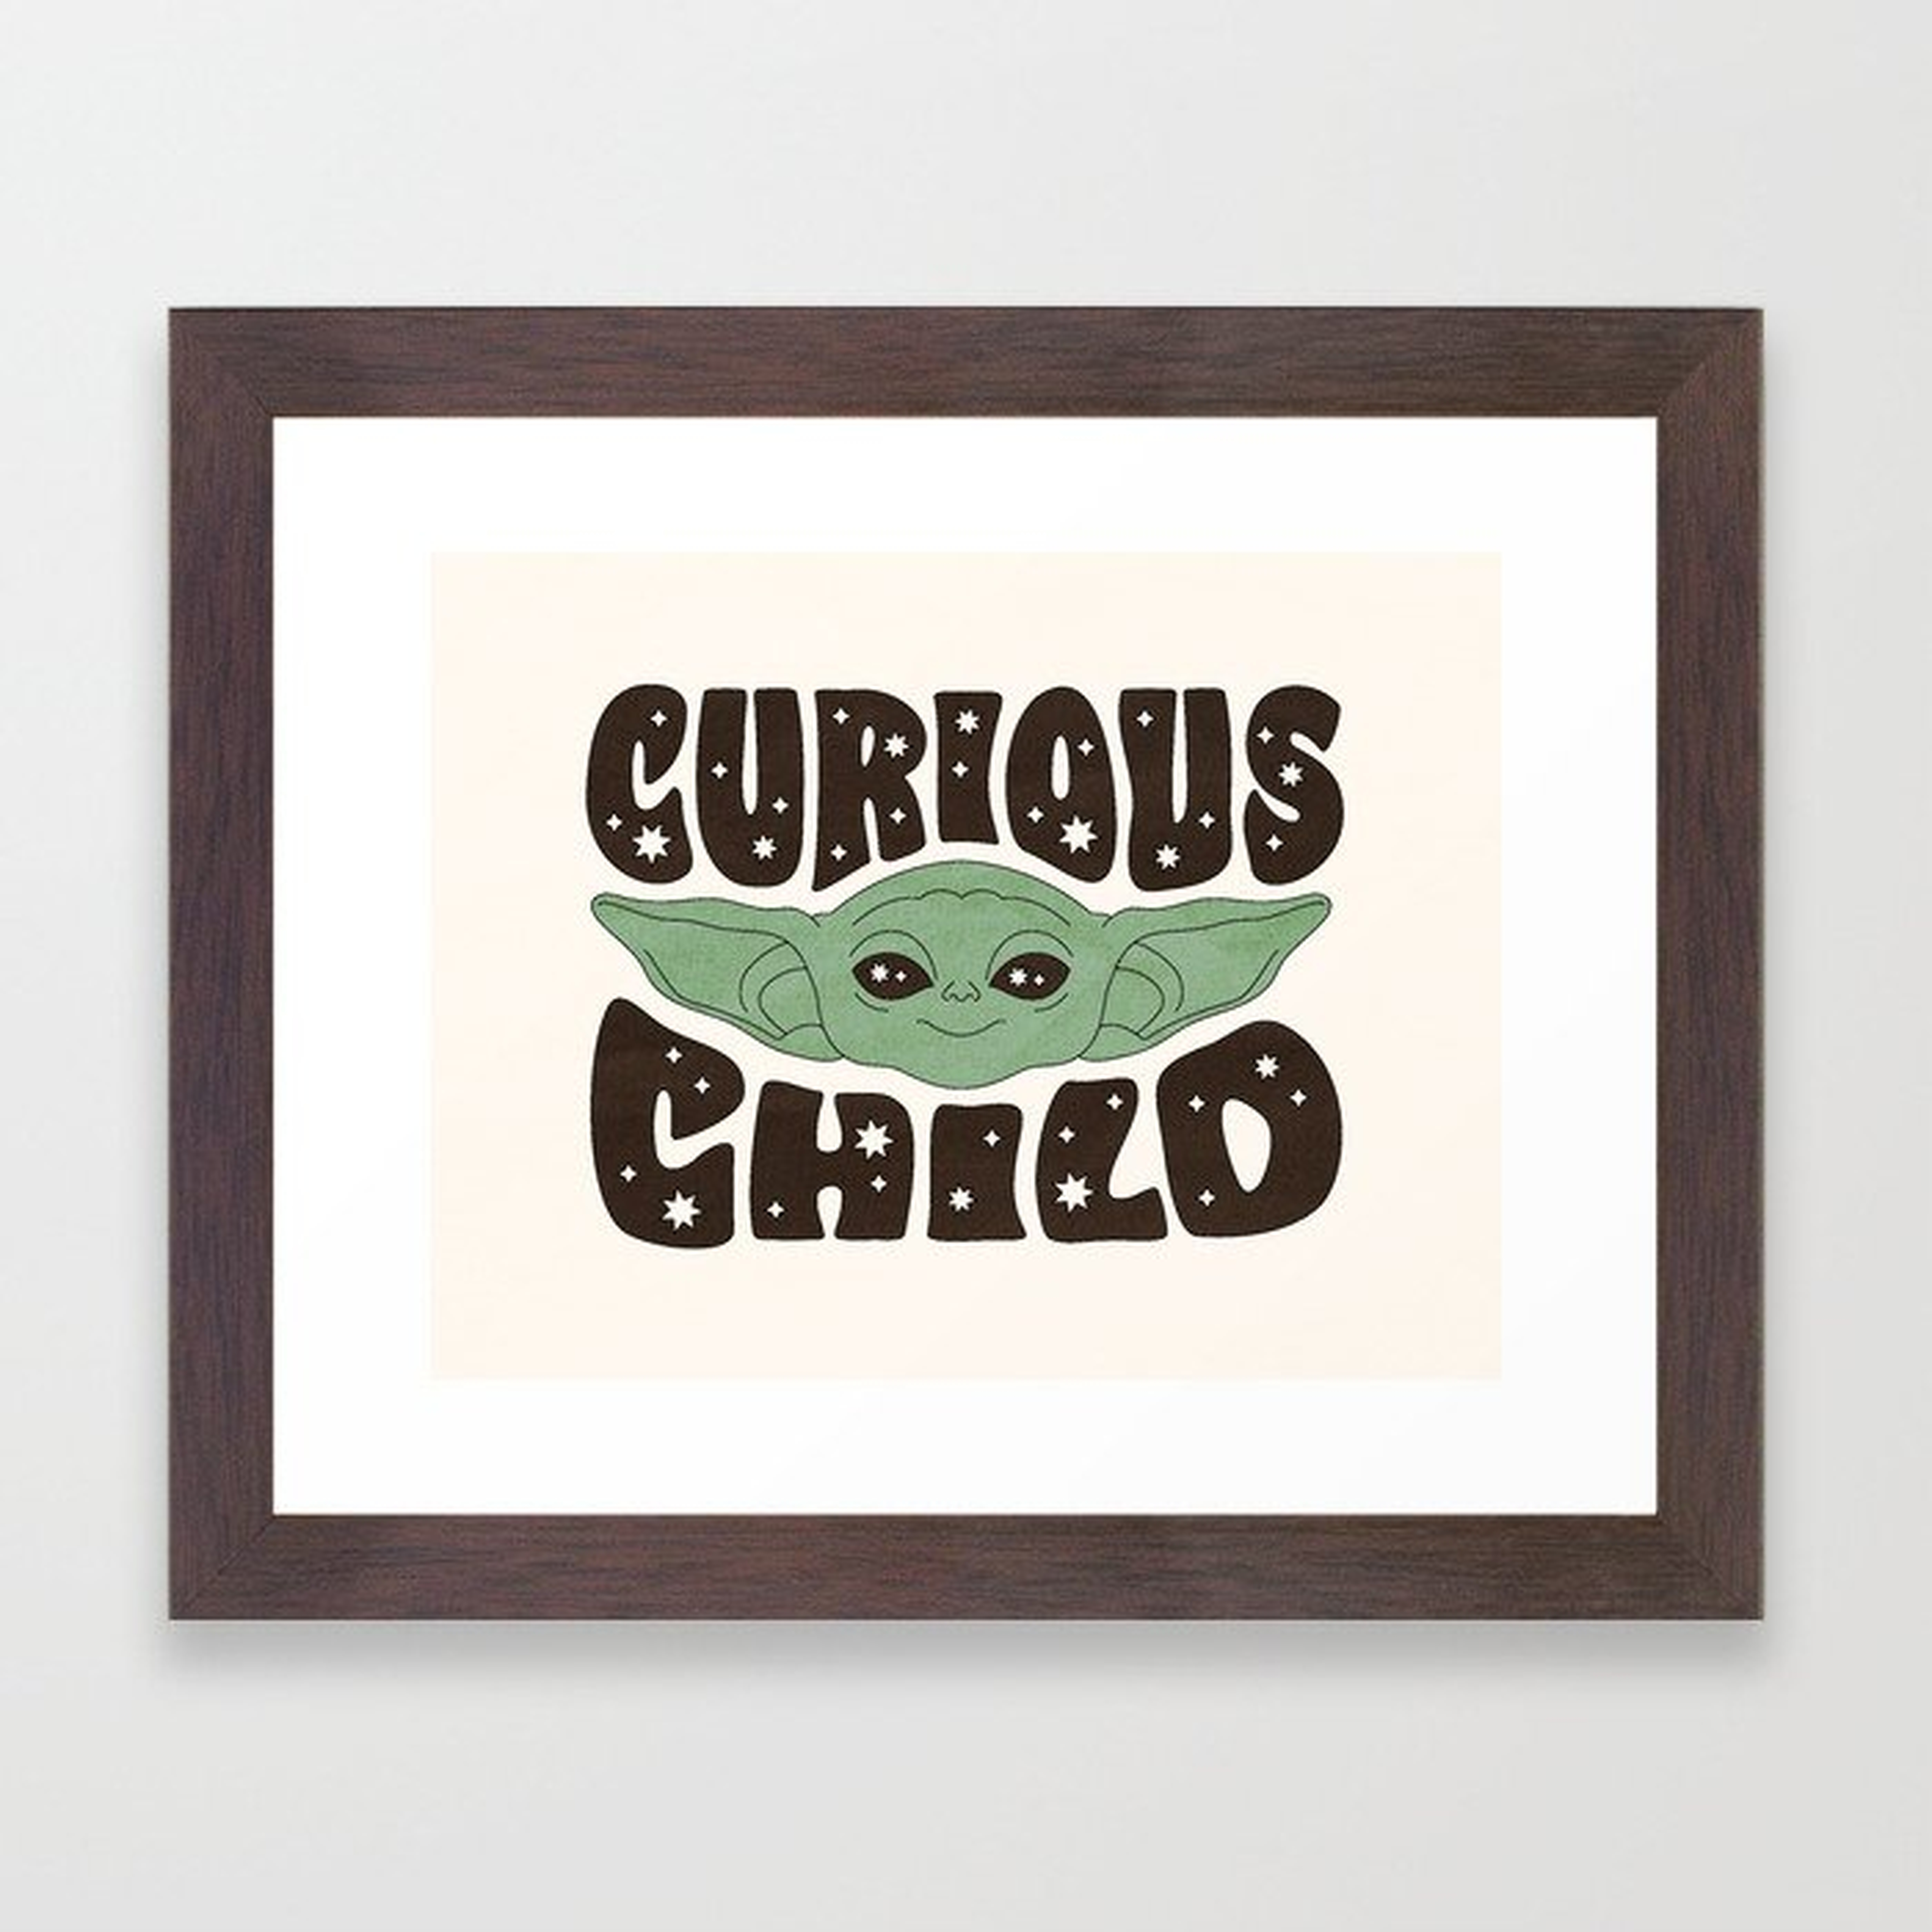 "Curious Child - Natural" by Berlin Michelle Framed Art Print - Society6